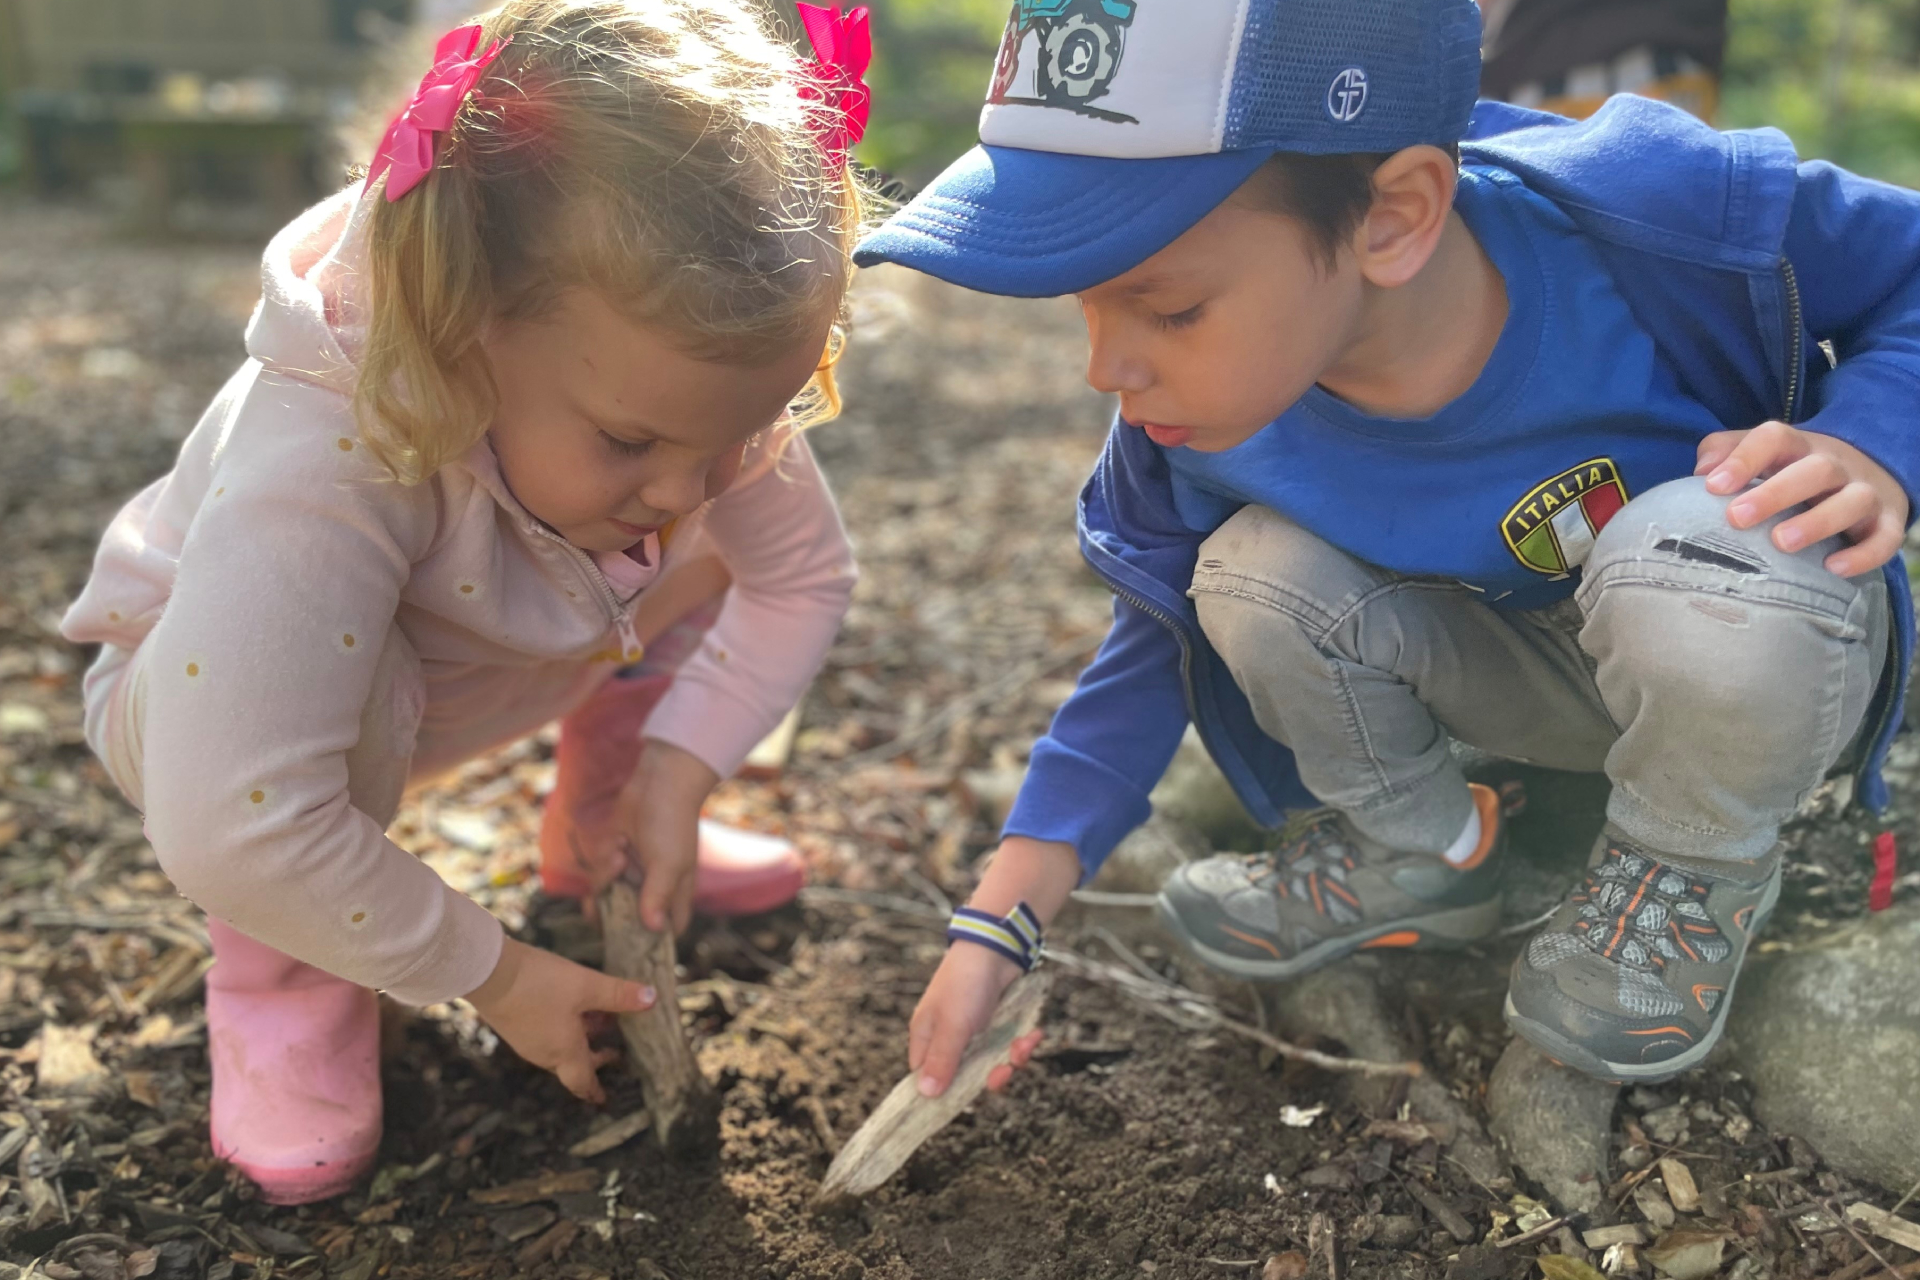 Two children dig in the dirt.